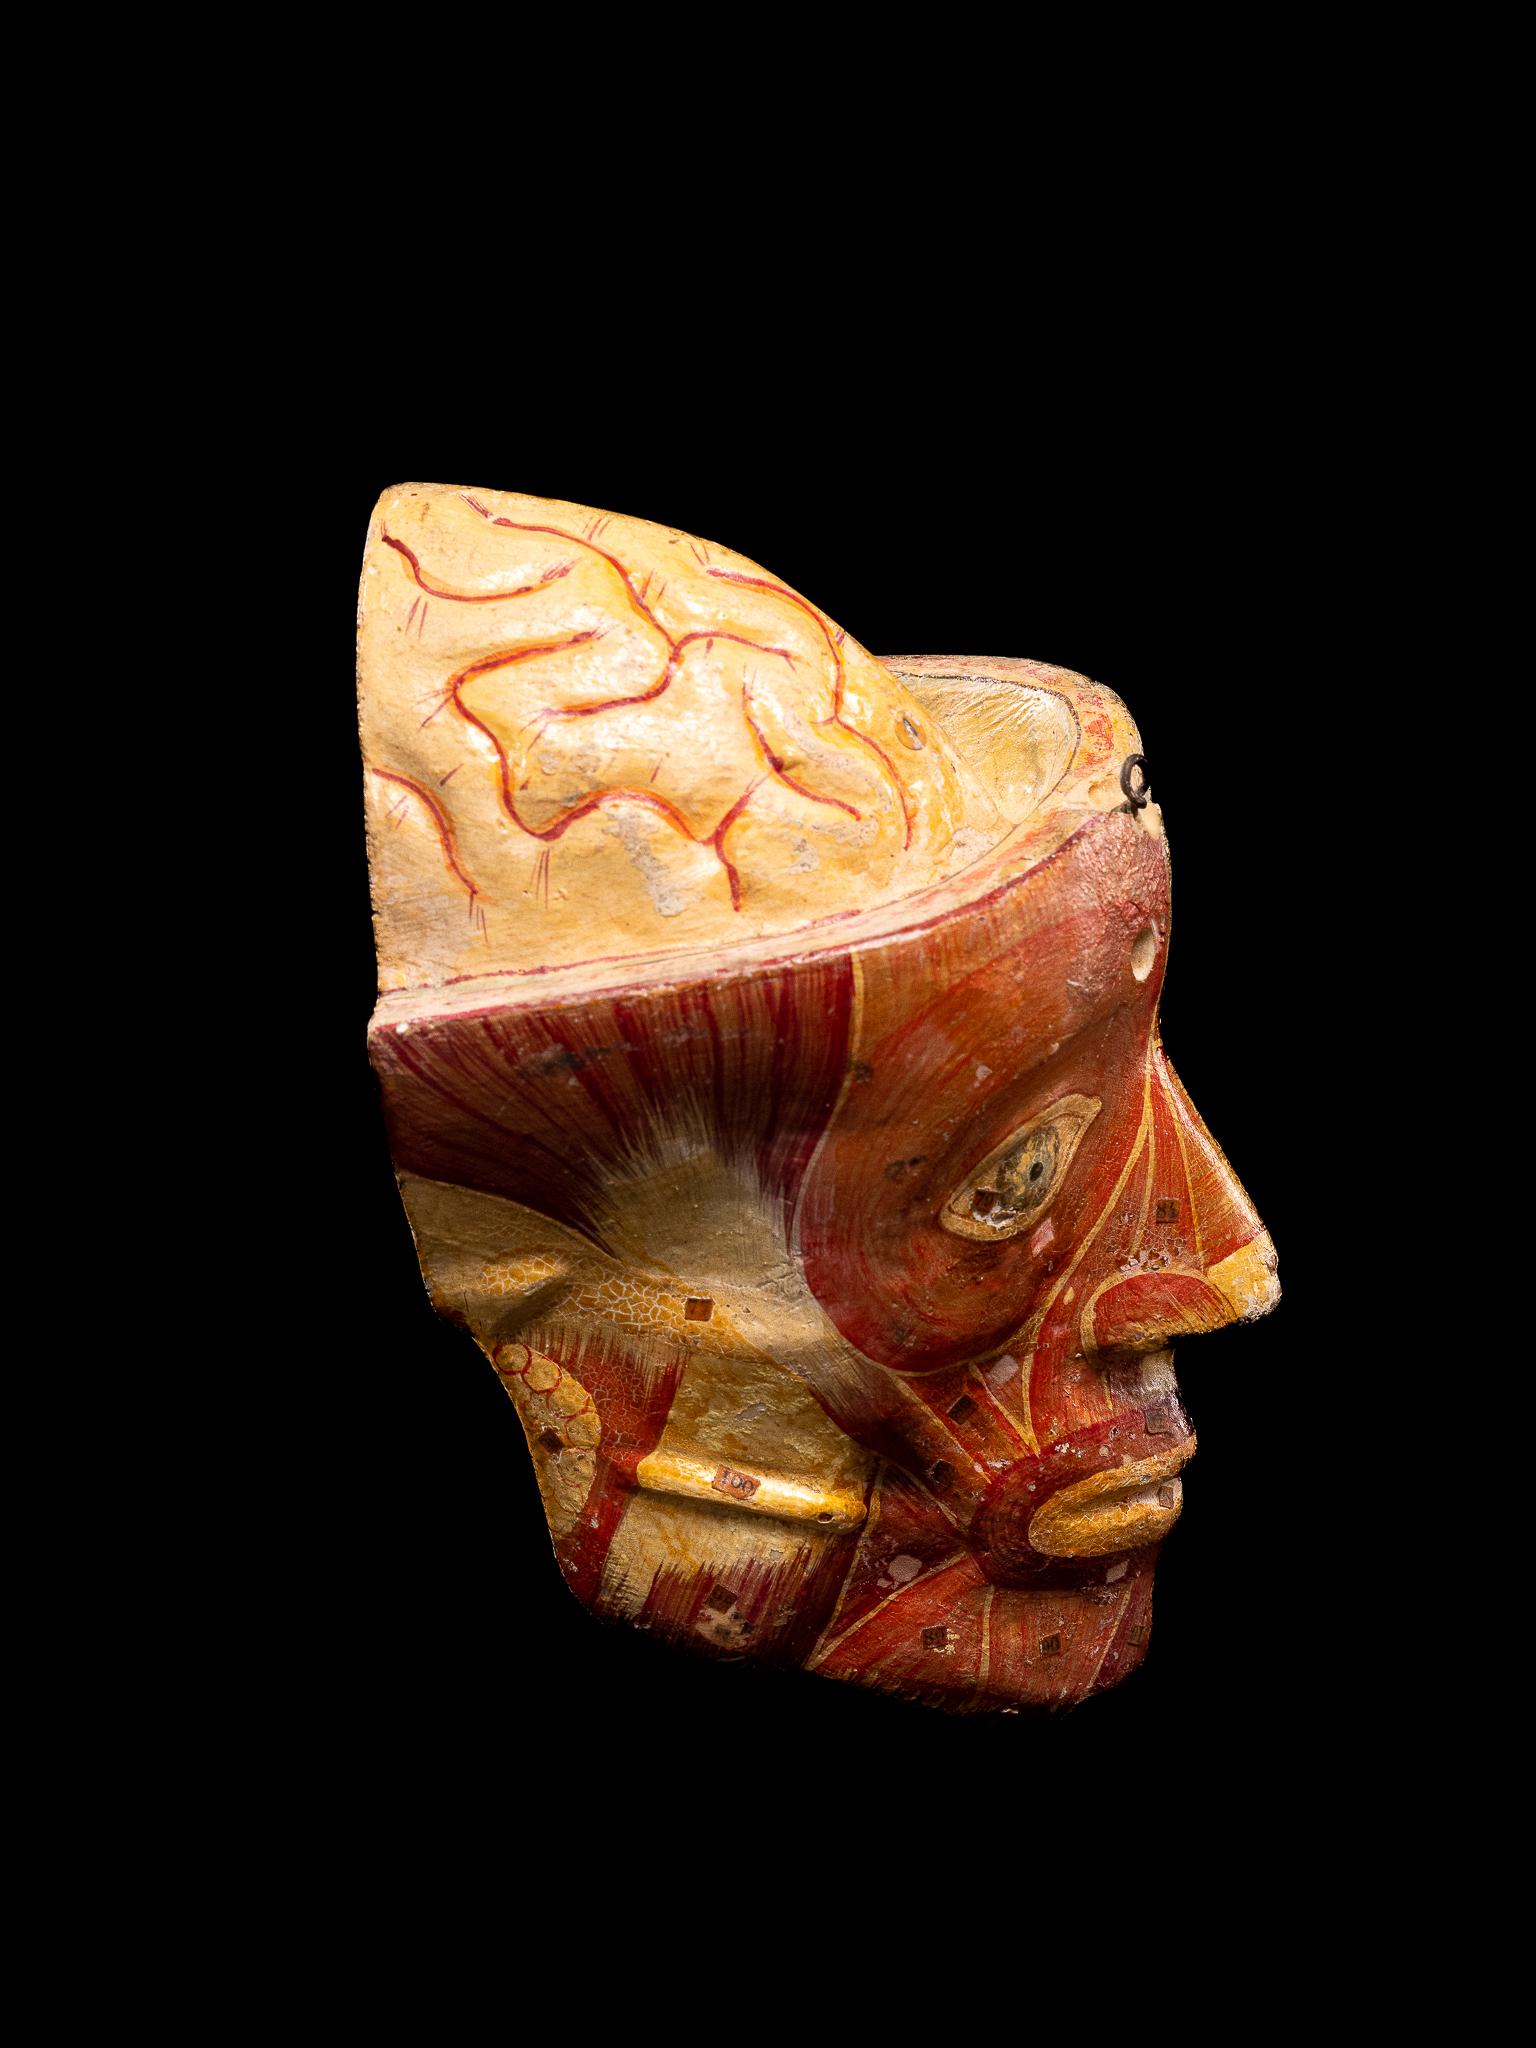 Anatomical cut of a human skull composed in natural painted papier-maché, with numbered labels on the different elements